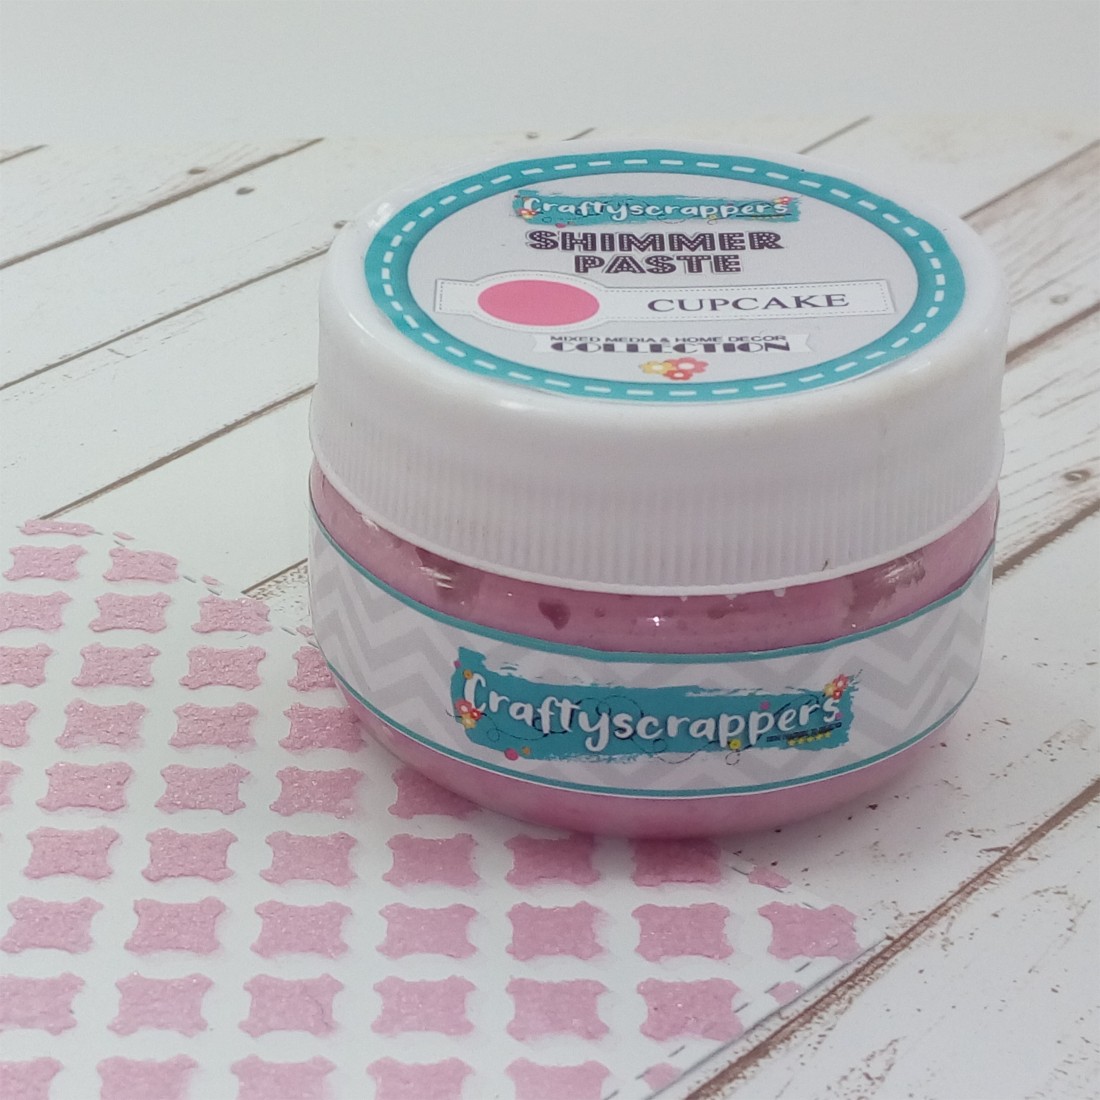 Craftyscrappers ShimmerPaste- CUPCAKE